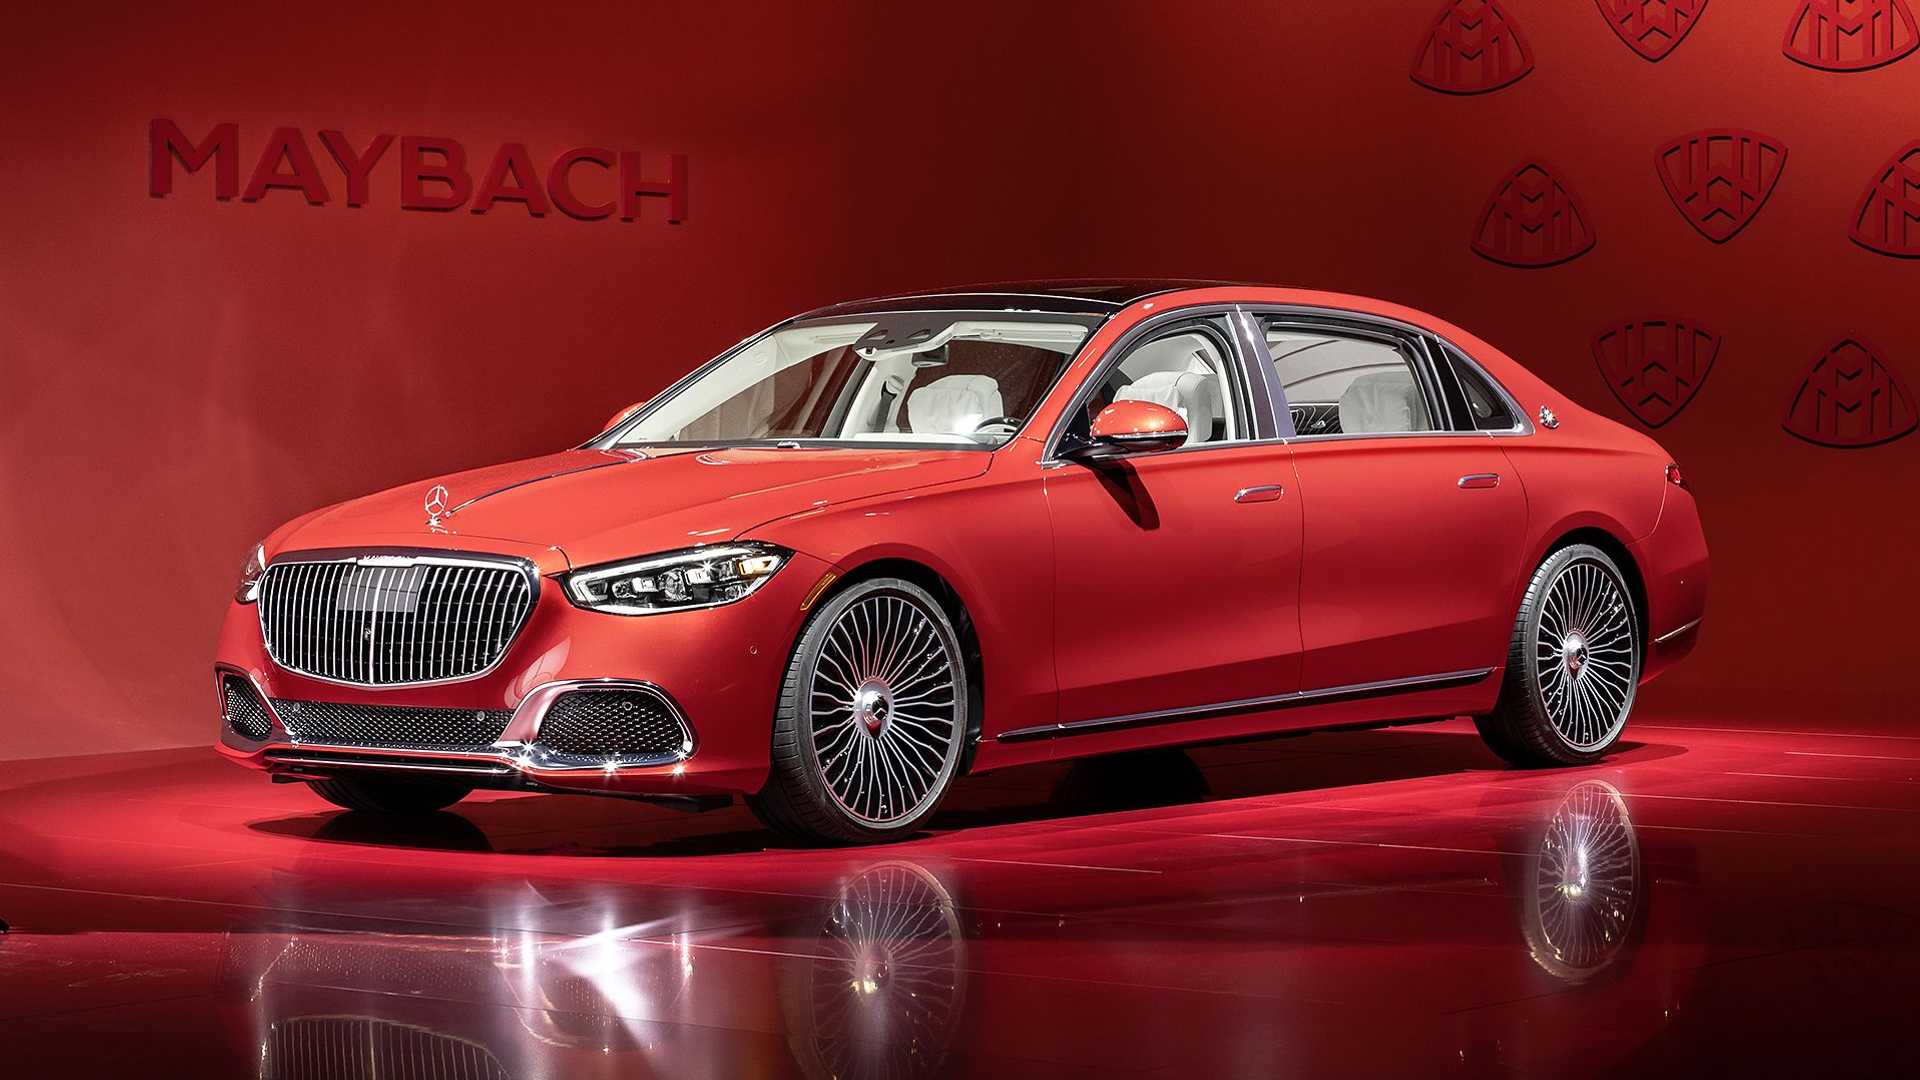 2021 Mercedes-Maybach S580 Officially Revealed, Luxury Overloaded